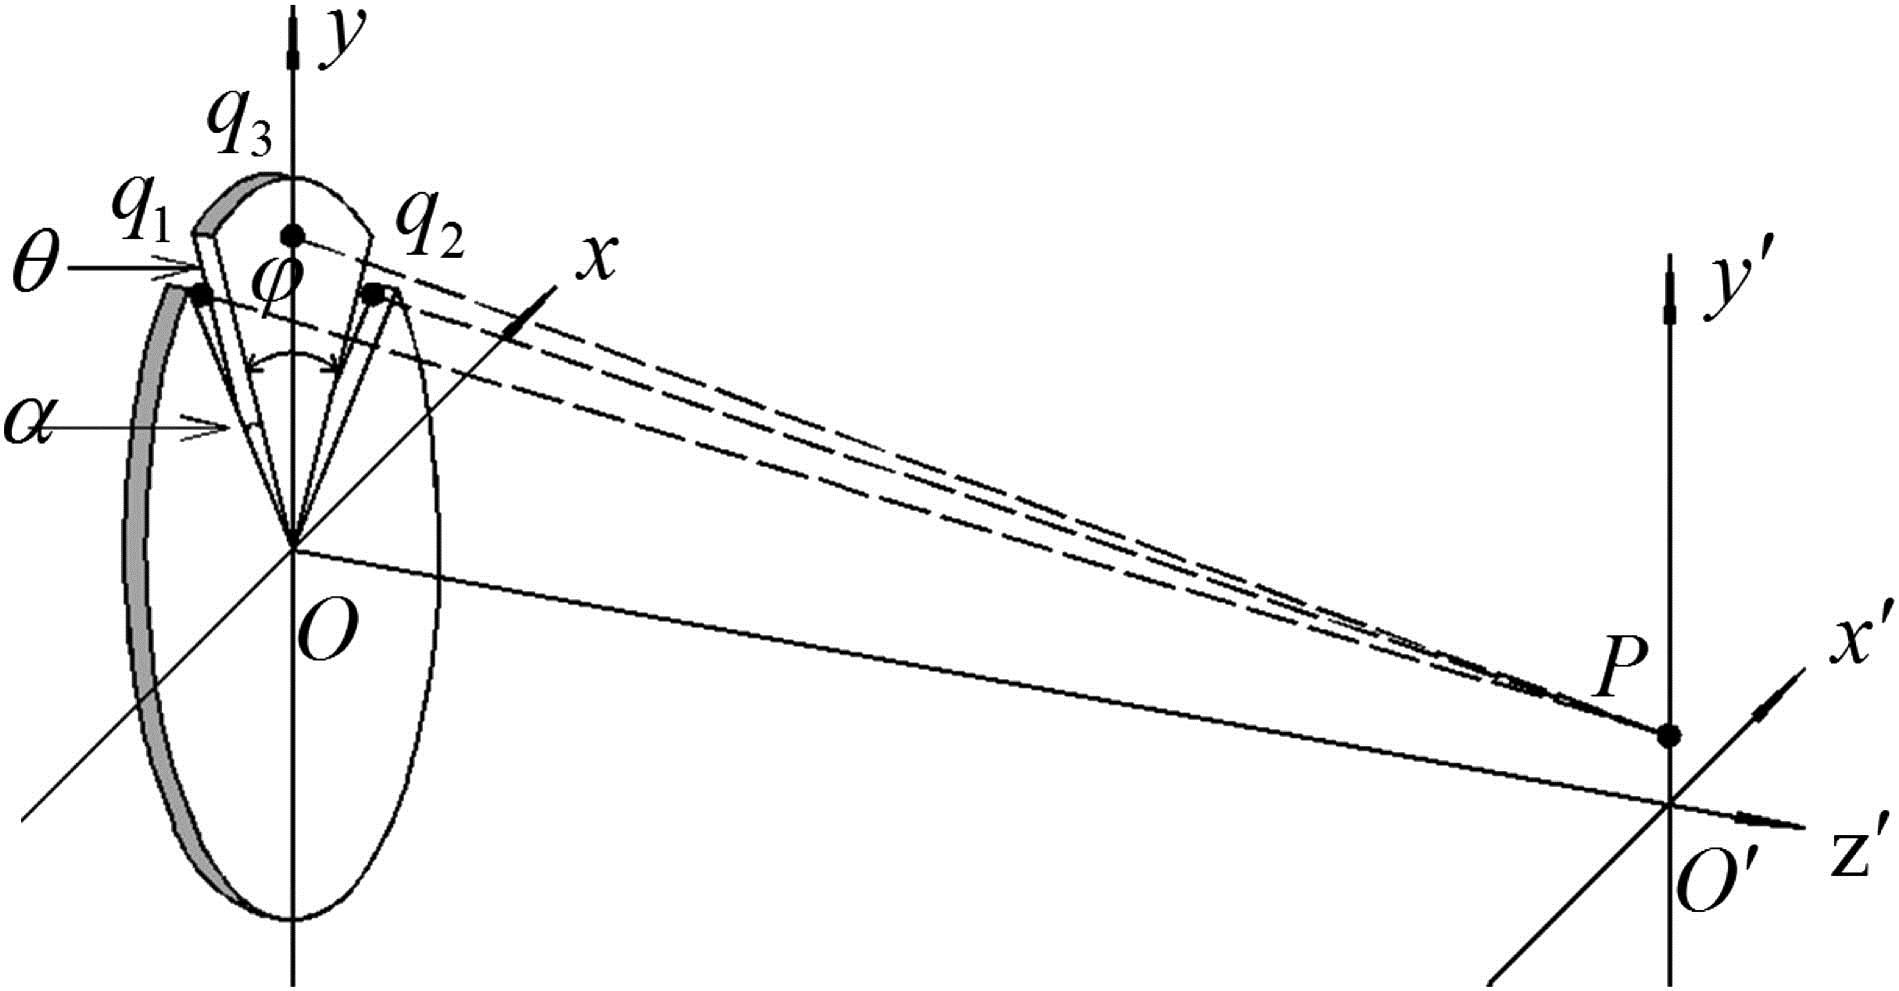 Schematic of ADS interference. α is the width of an angular single slit, and ϕ is the angle between dynamic two single slits. q1, q2, and q3 are three points on the mask and oq3 is the angular bisector of ∠q1oq2. P is a point on the far field (with q1P=q2P), which is chosen to observe interferential intensity. θ represents an additional phase on one single slit.